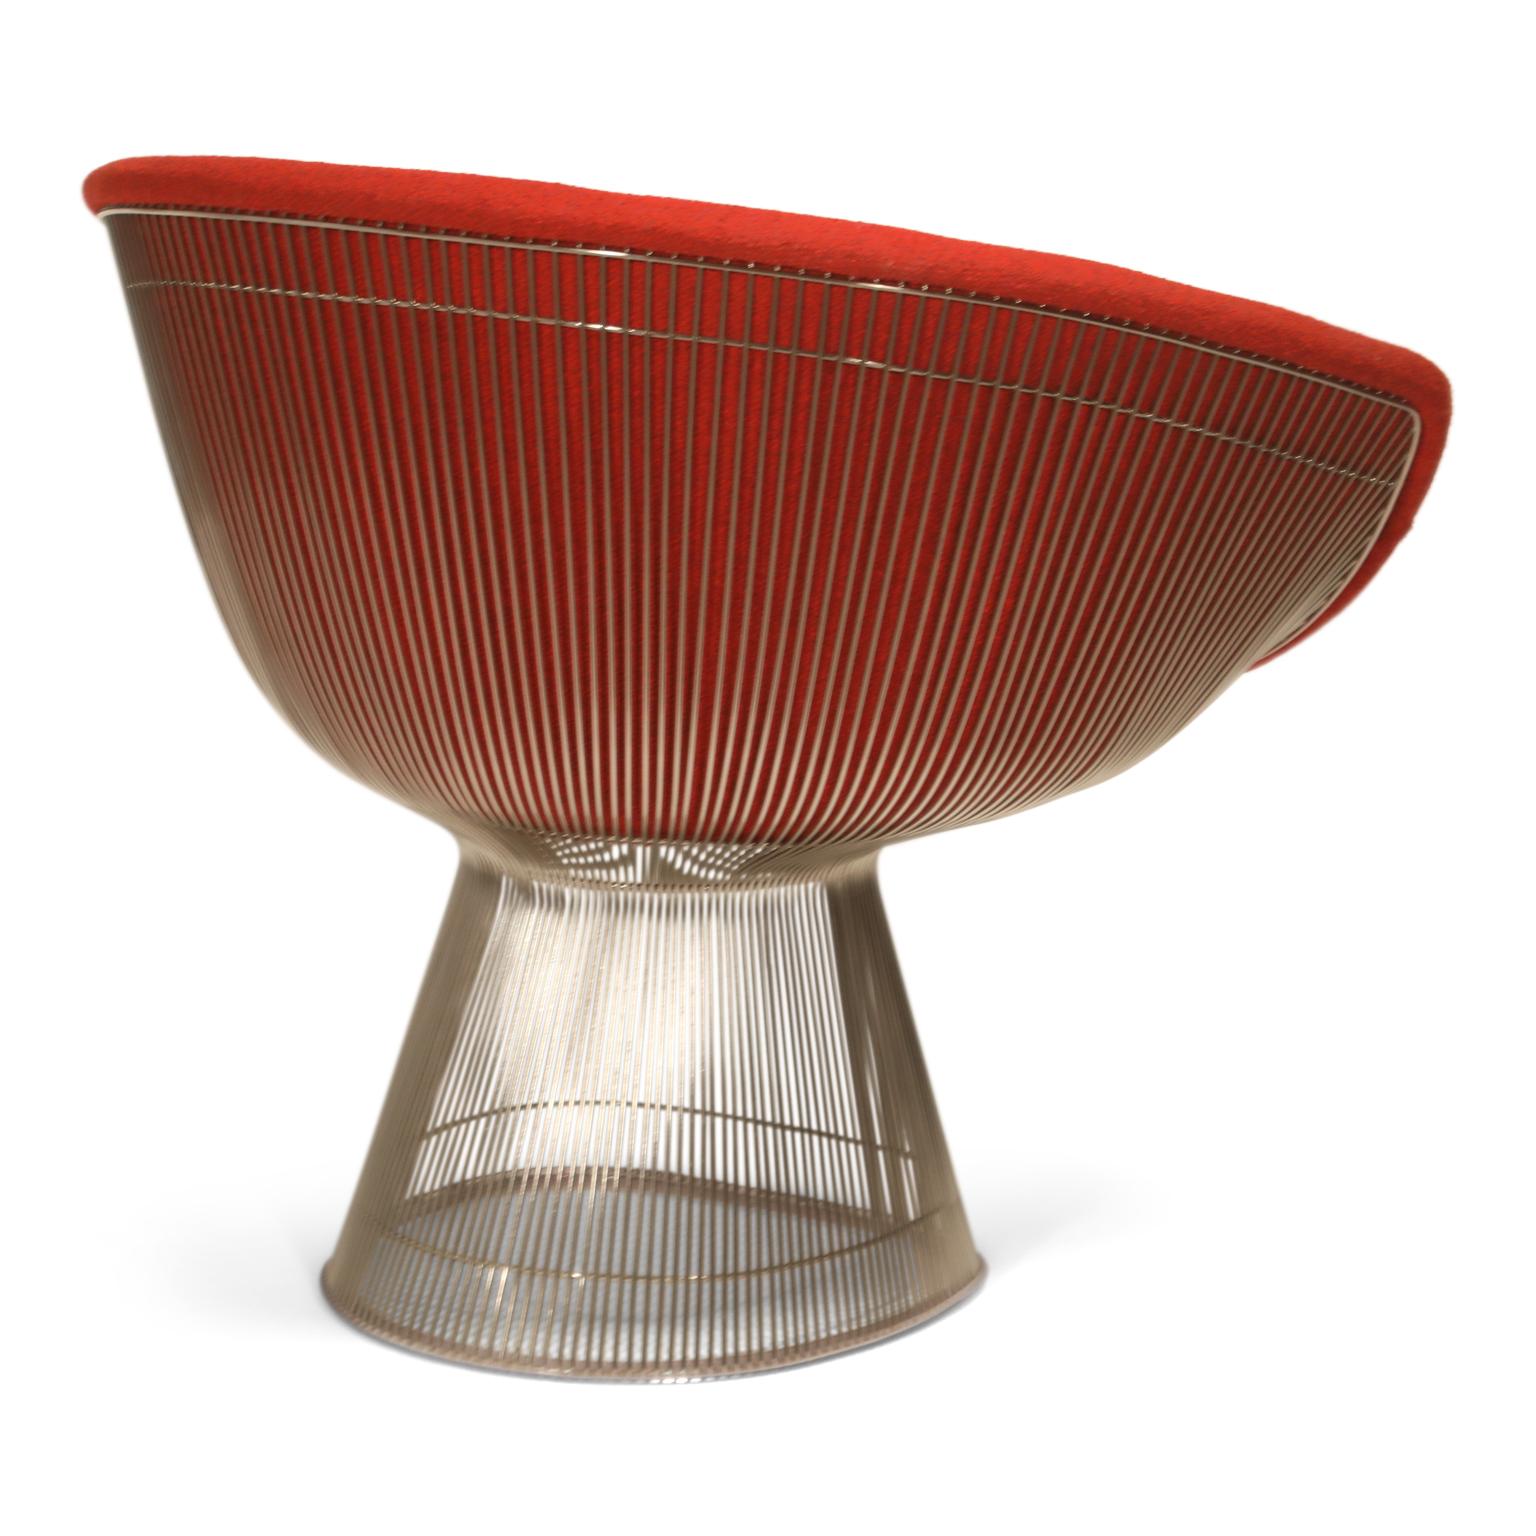 Contemporary Warren Platner for Knoll Lounge Chairs in Red Wool Boucle, Near Mint Set of Four